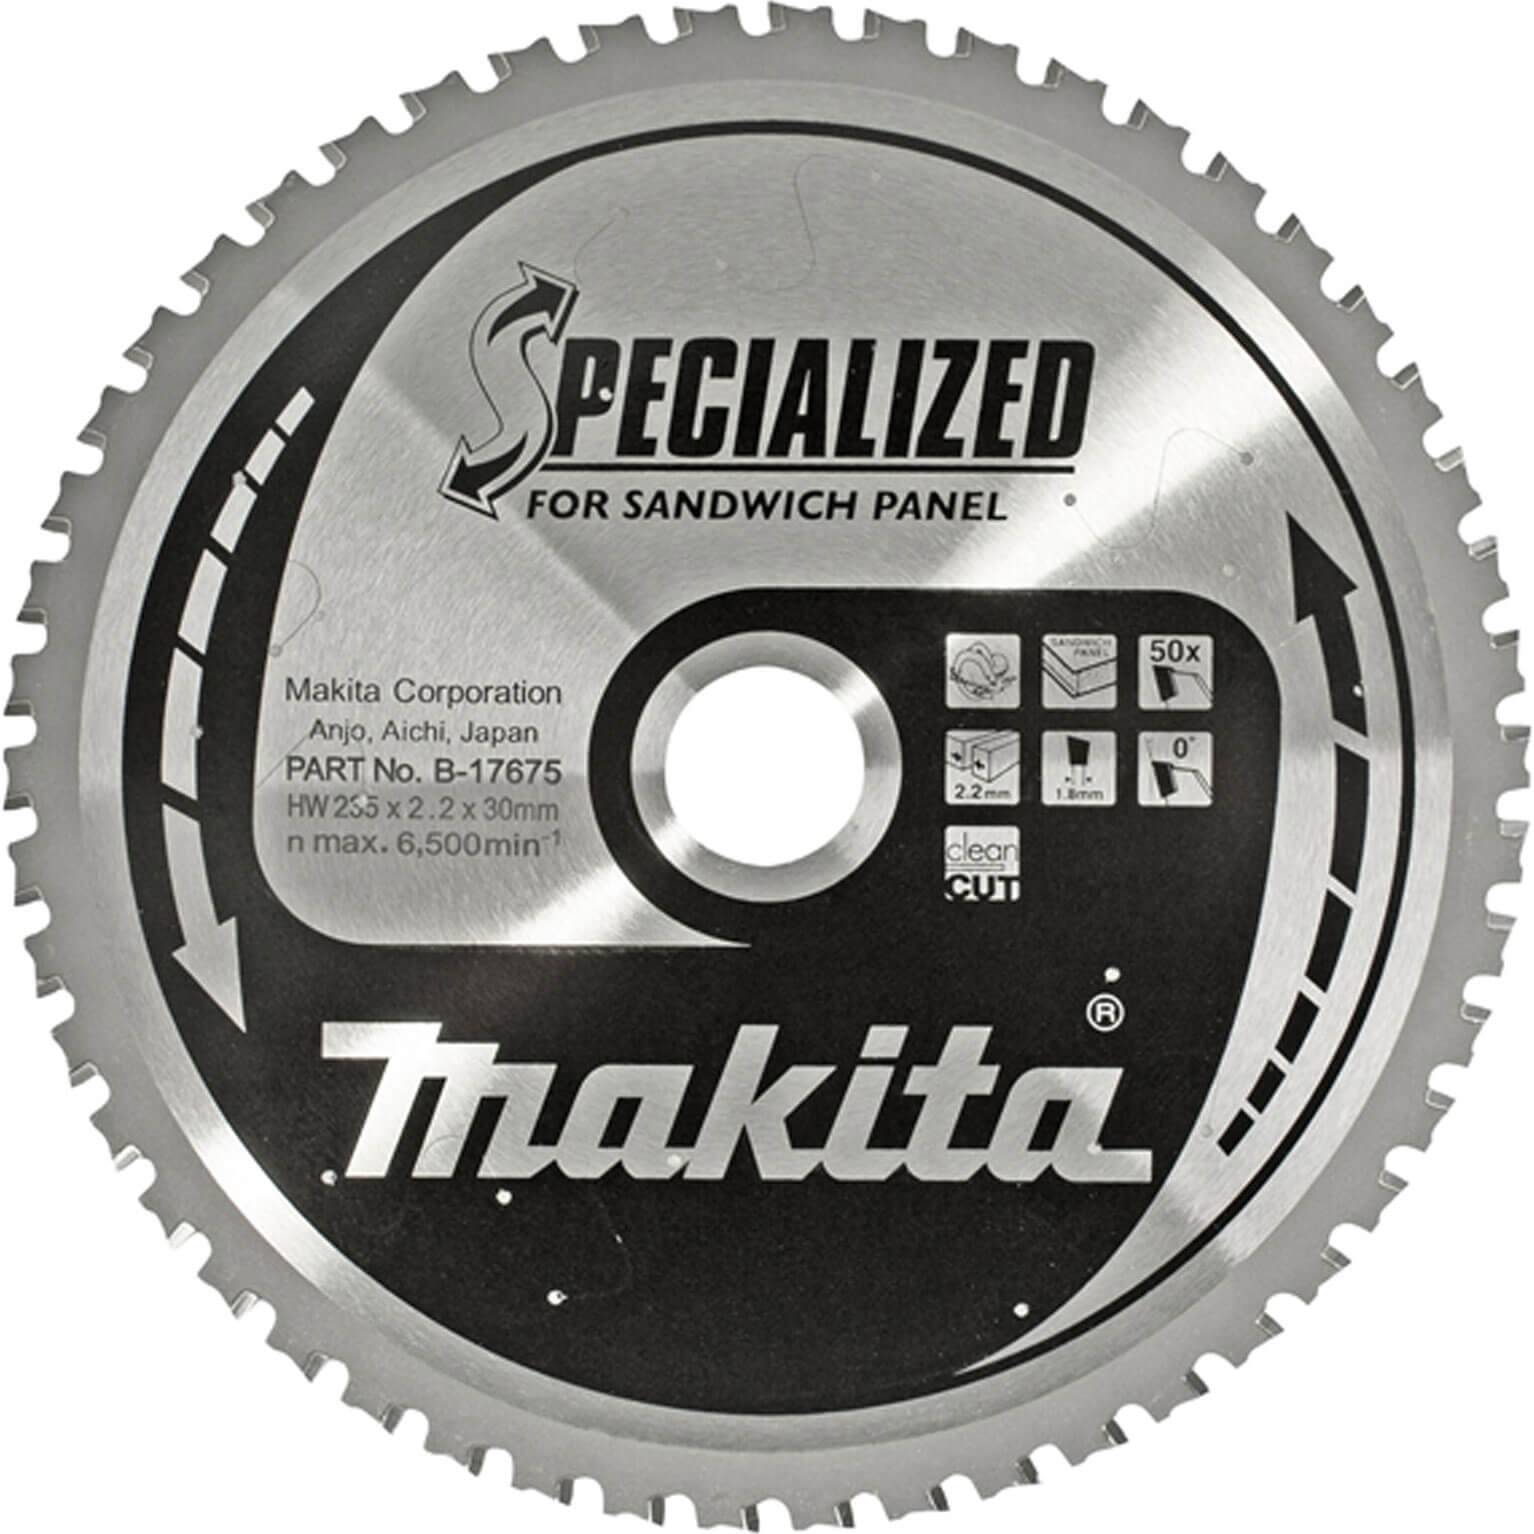 Photo of Makita Specialized Sandwich Panel Cutting Saw Blade 355mm 80t 30mm